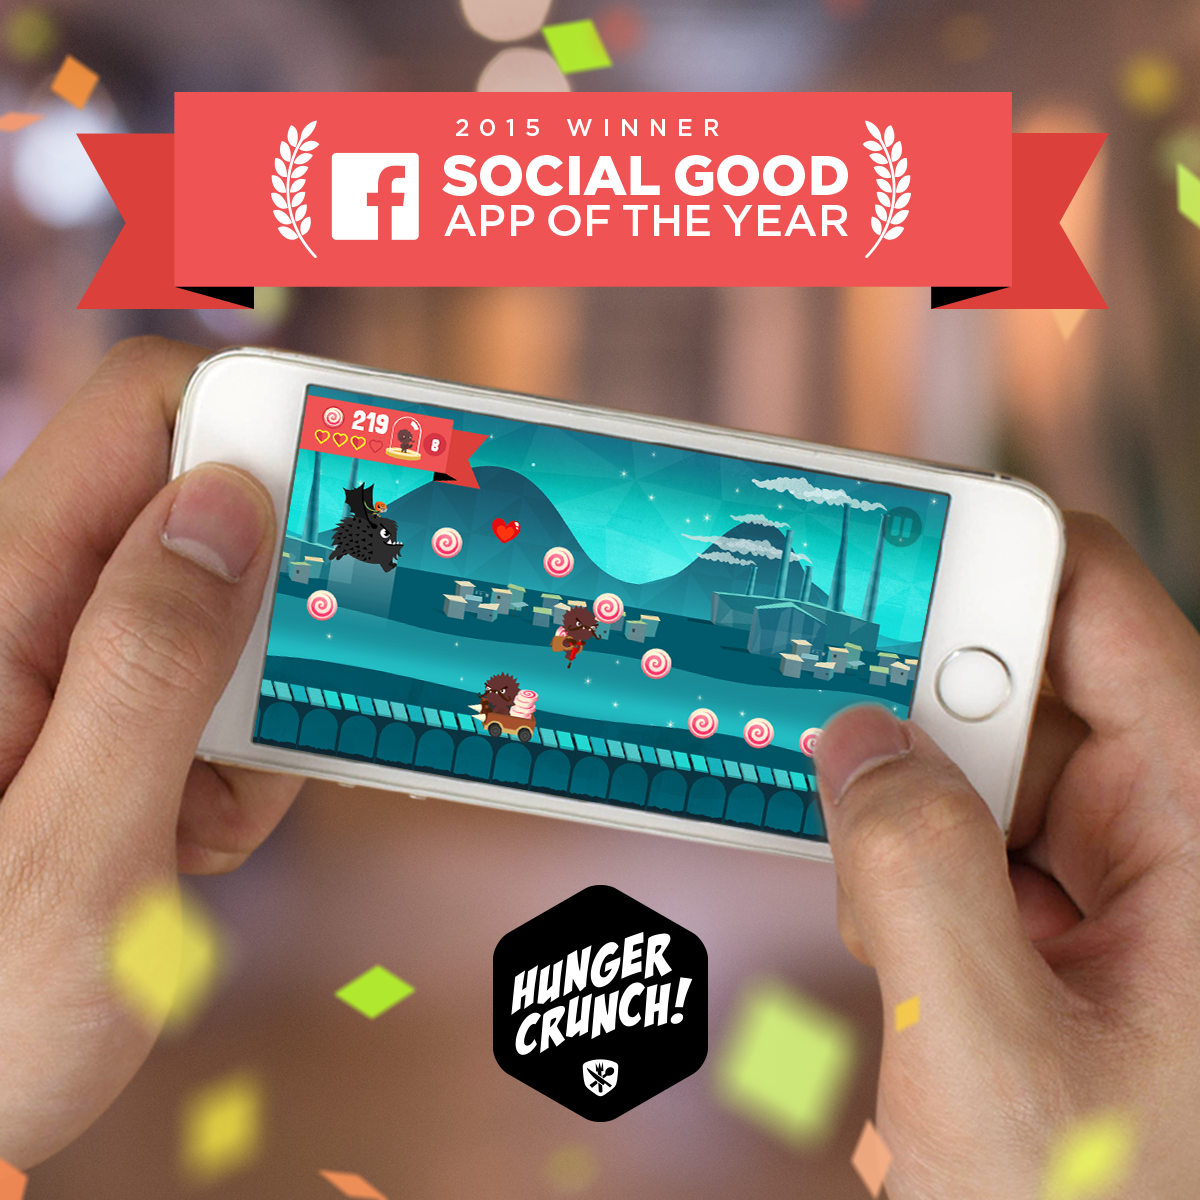 Facebook’s “Social Good App of the Year" is not only super challenging it also feeds orphaned children worldwide!